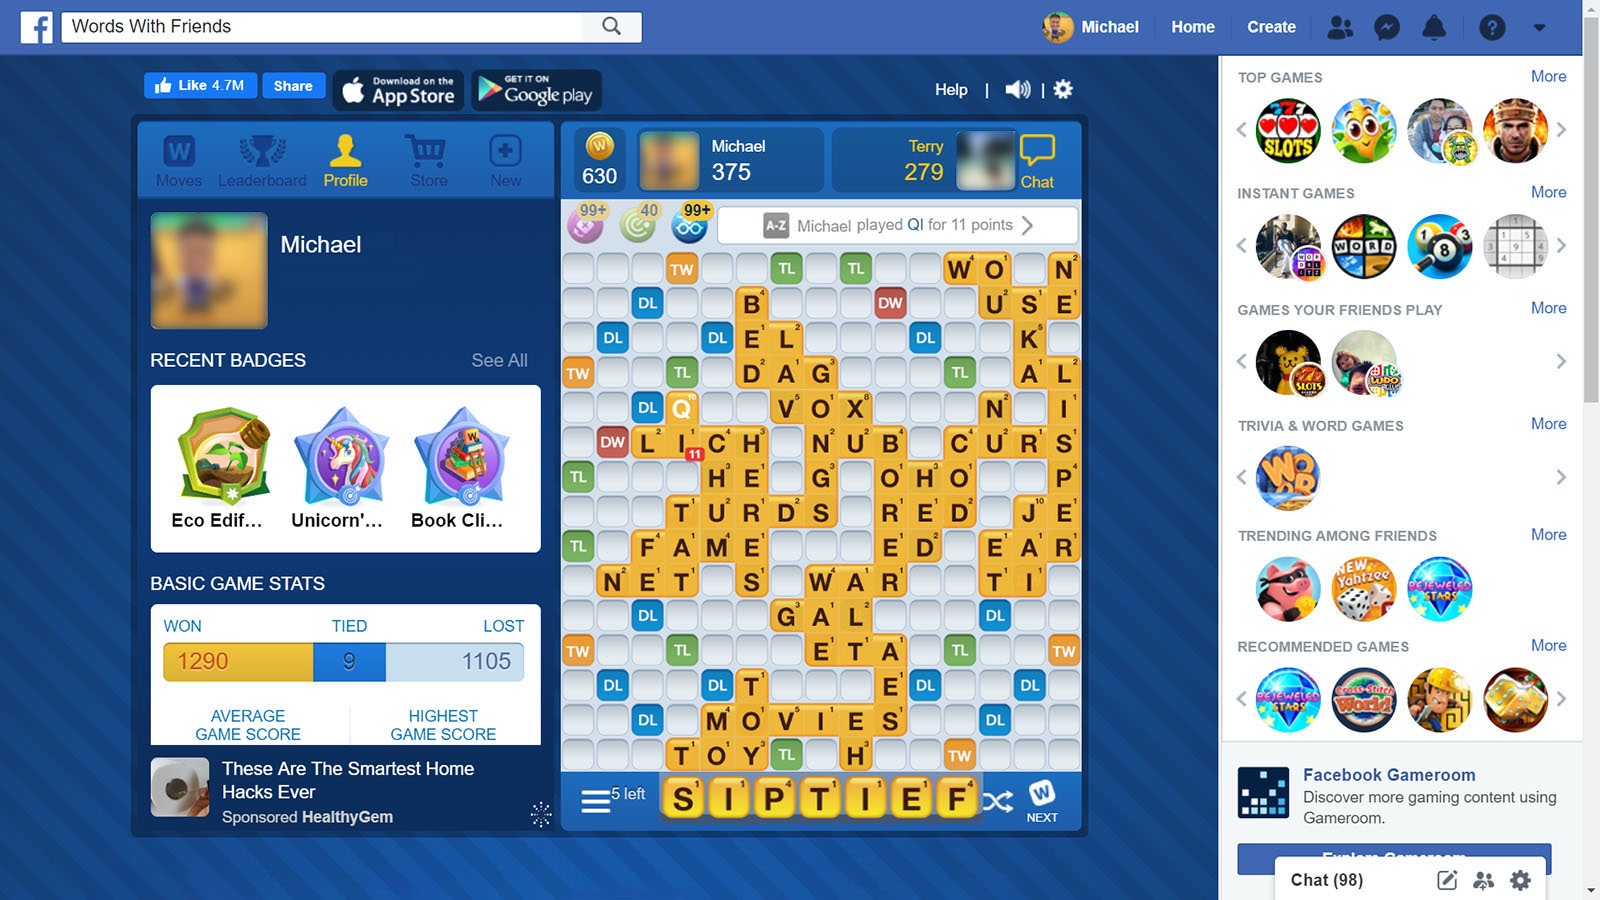 Screenshot of Words With Friends game